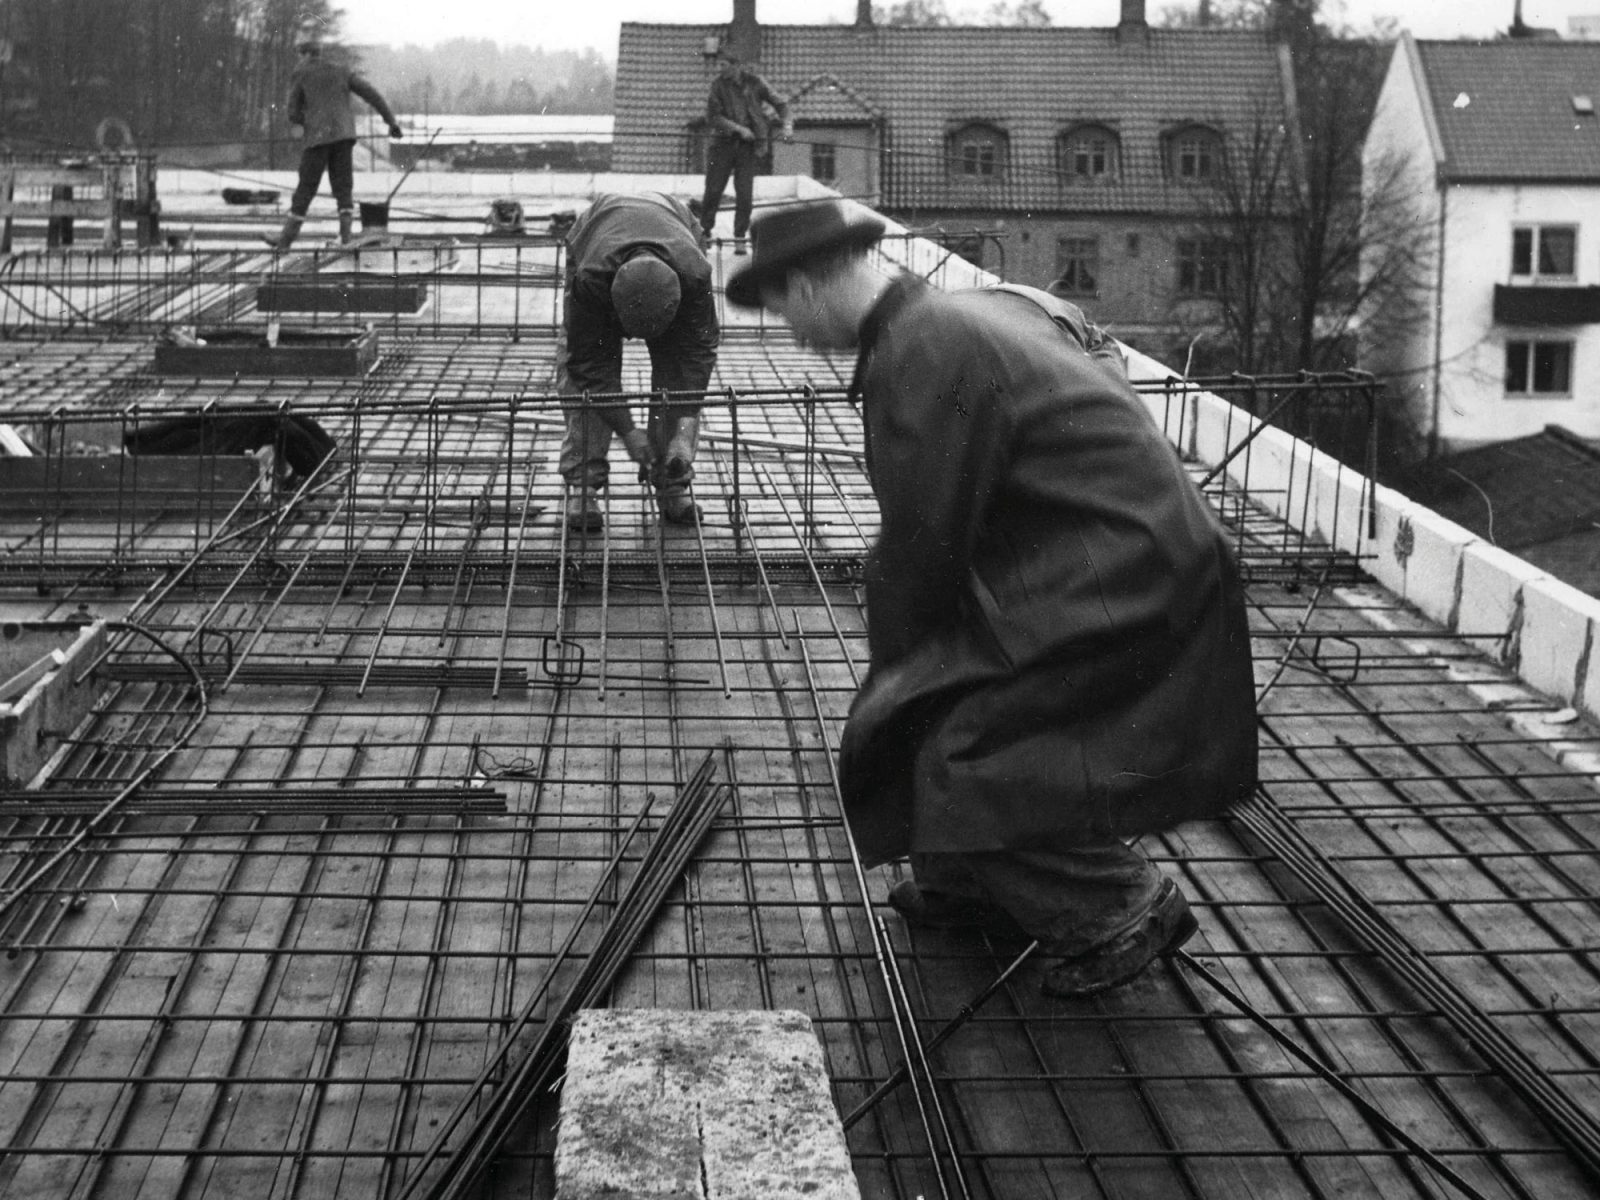 Man in 1950s style hat and coat working together with others at a construction site.